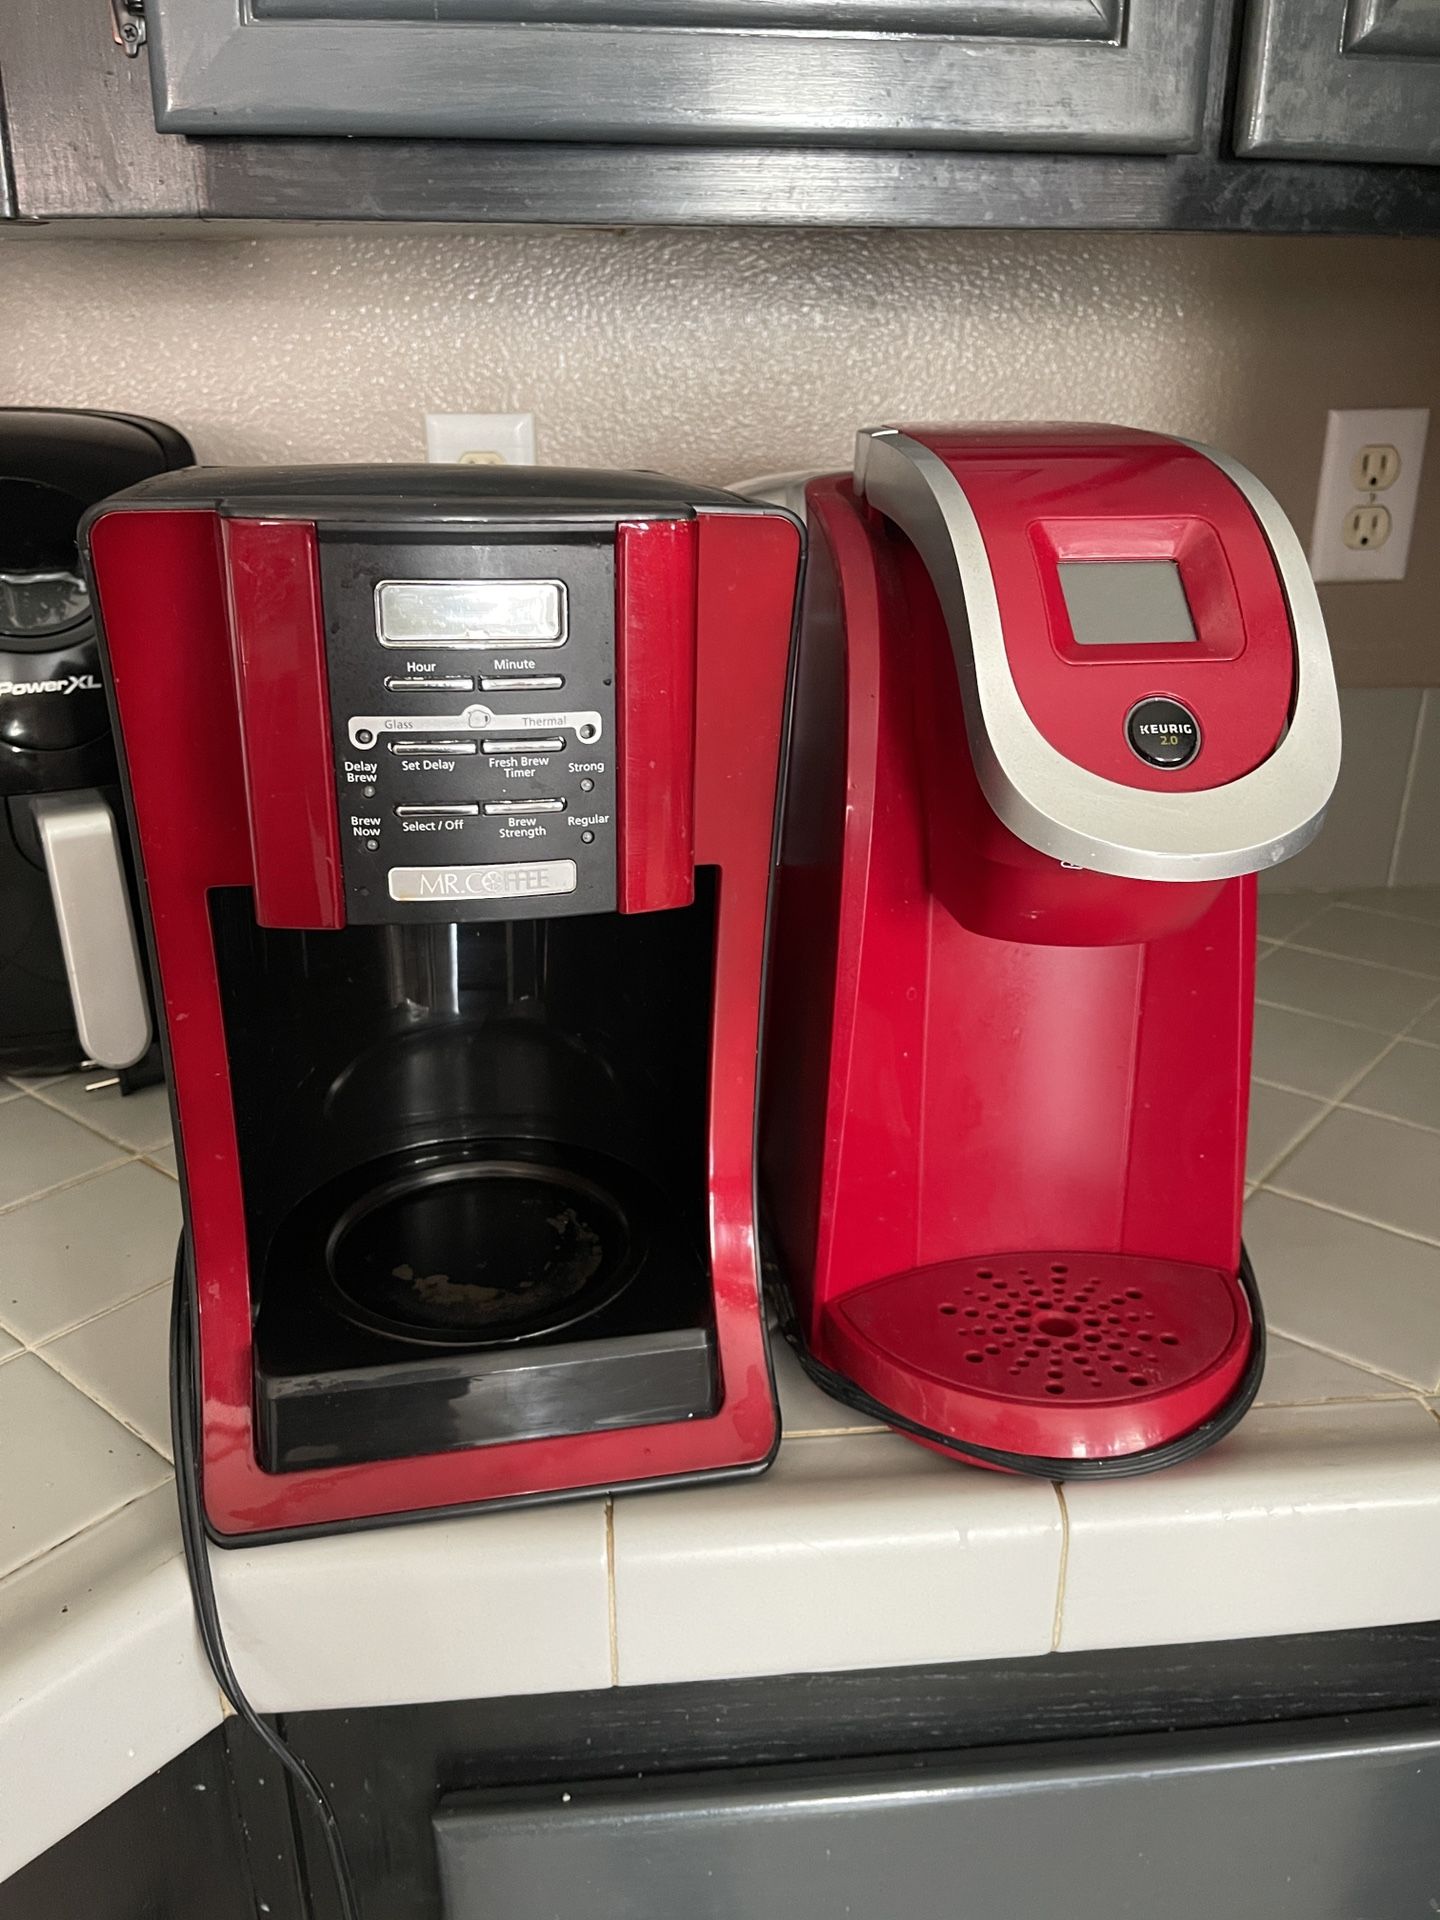 KEURIG Coffe Maker Use But In Good Condition 